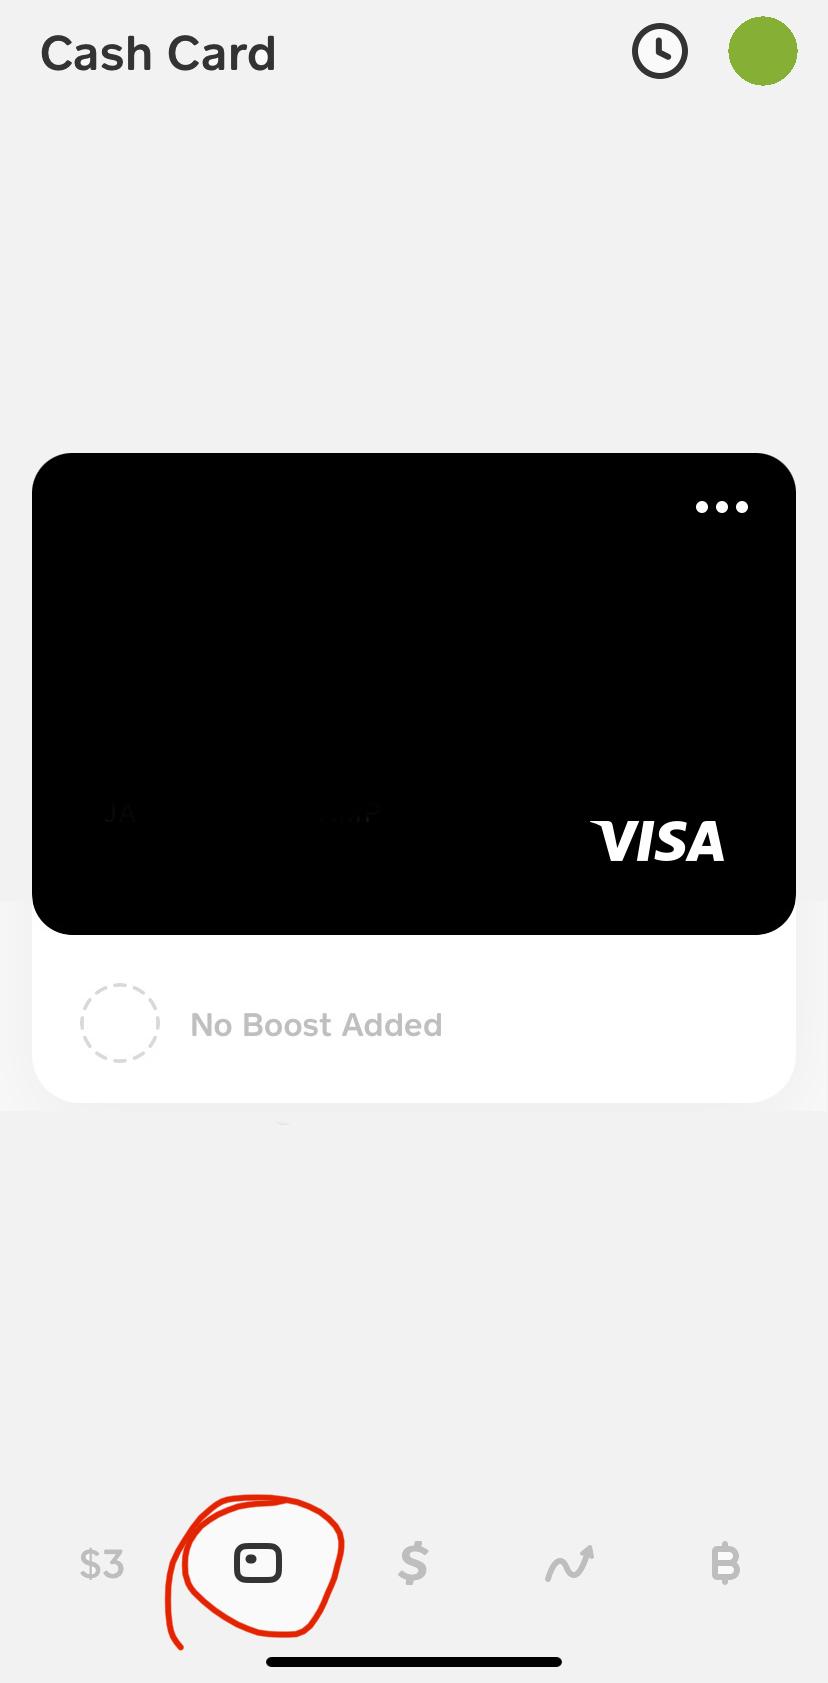 Tap the Cash Card icon